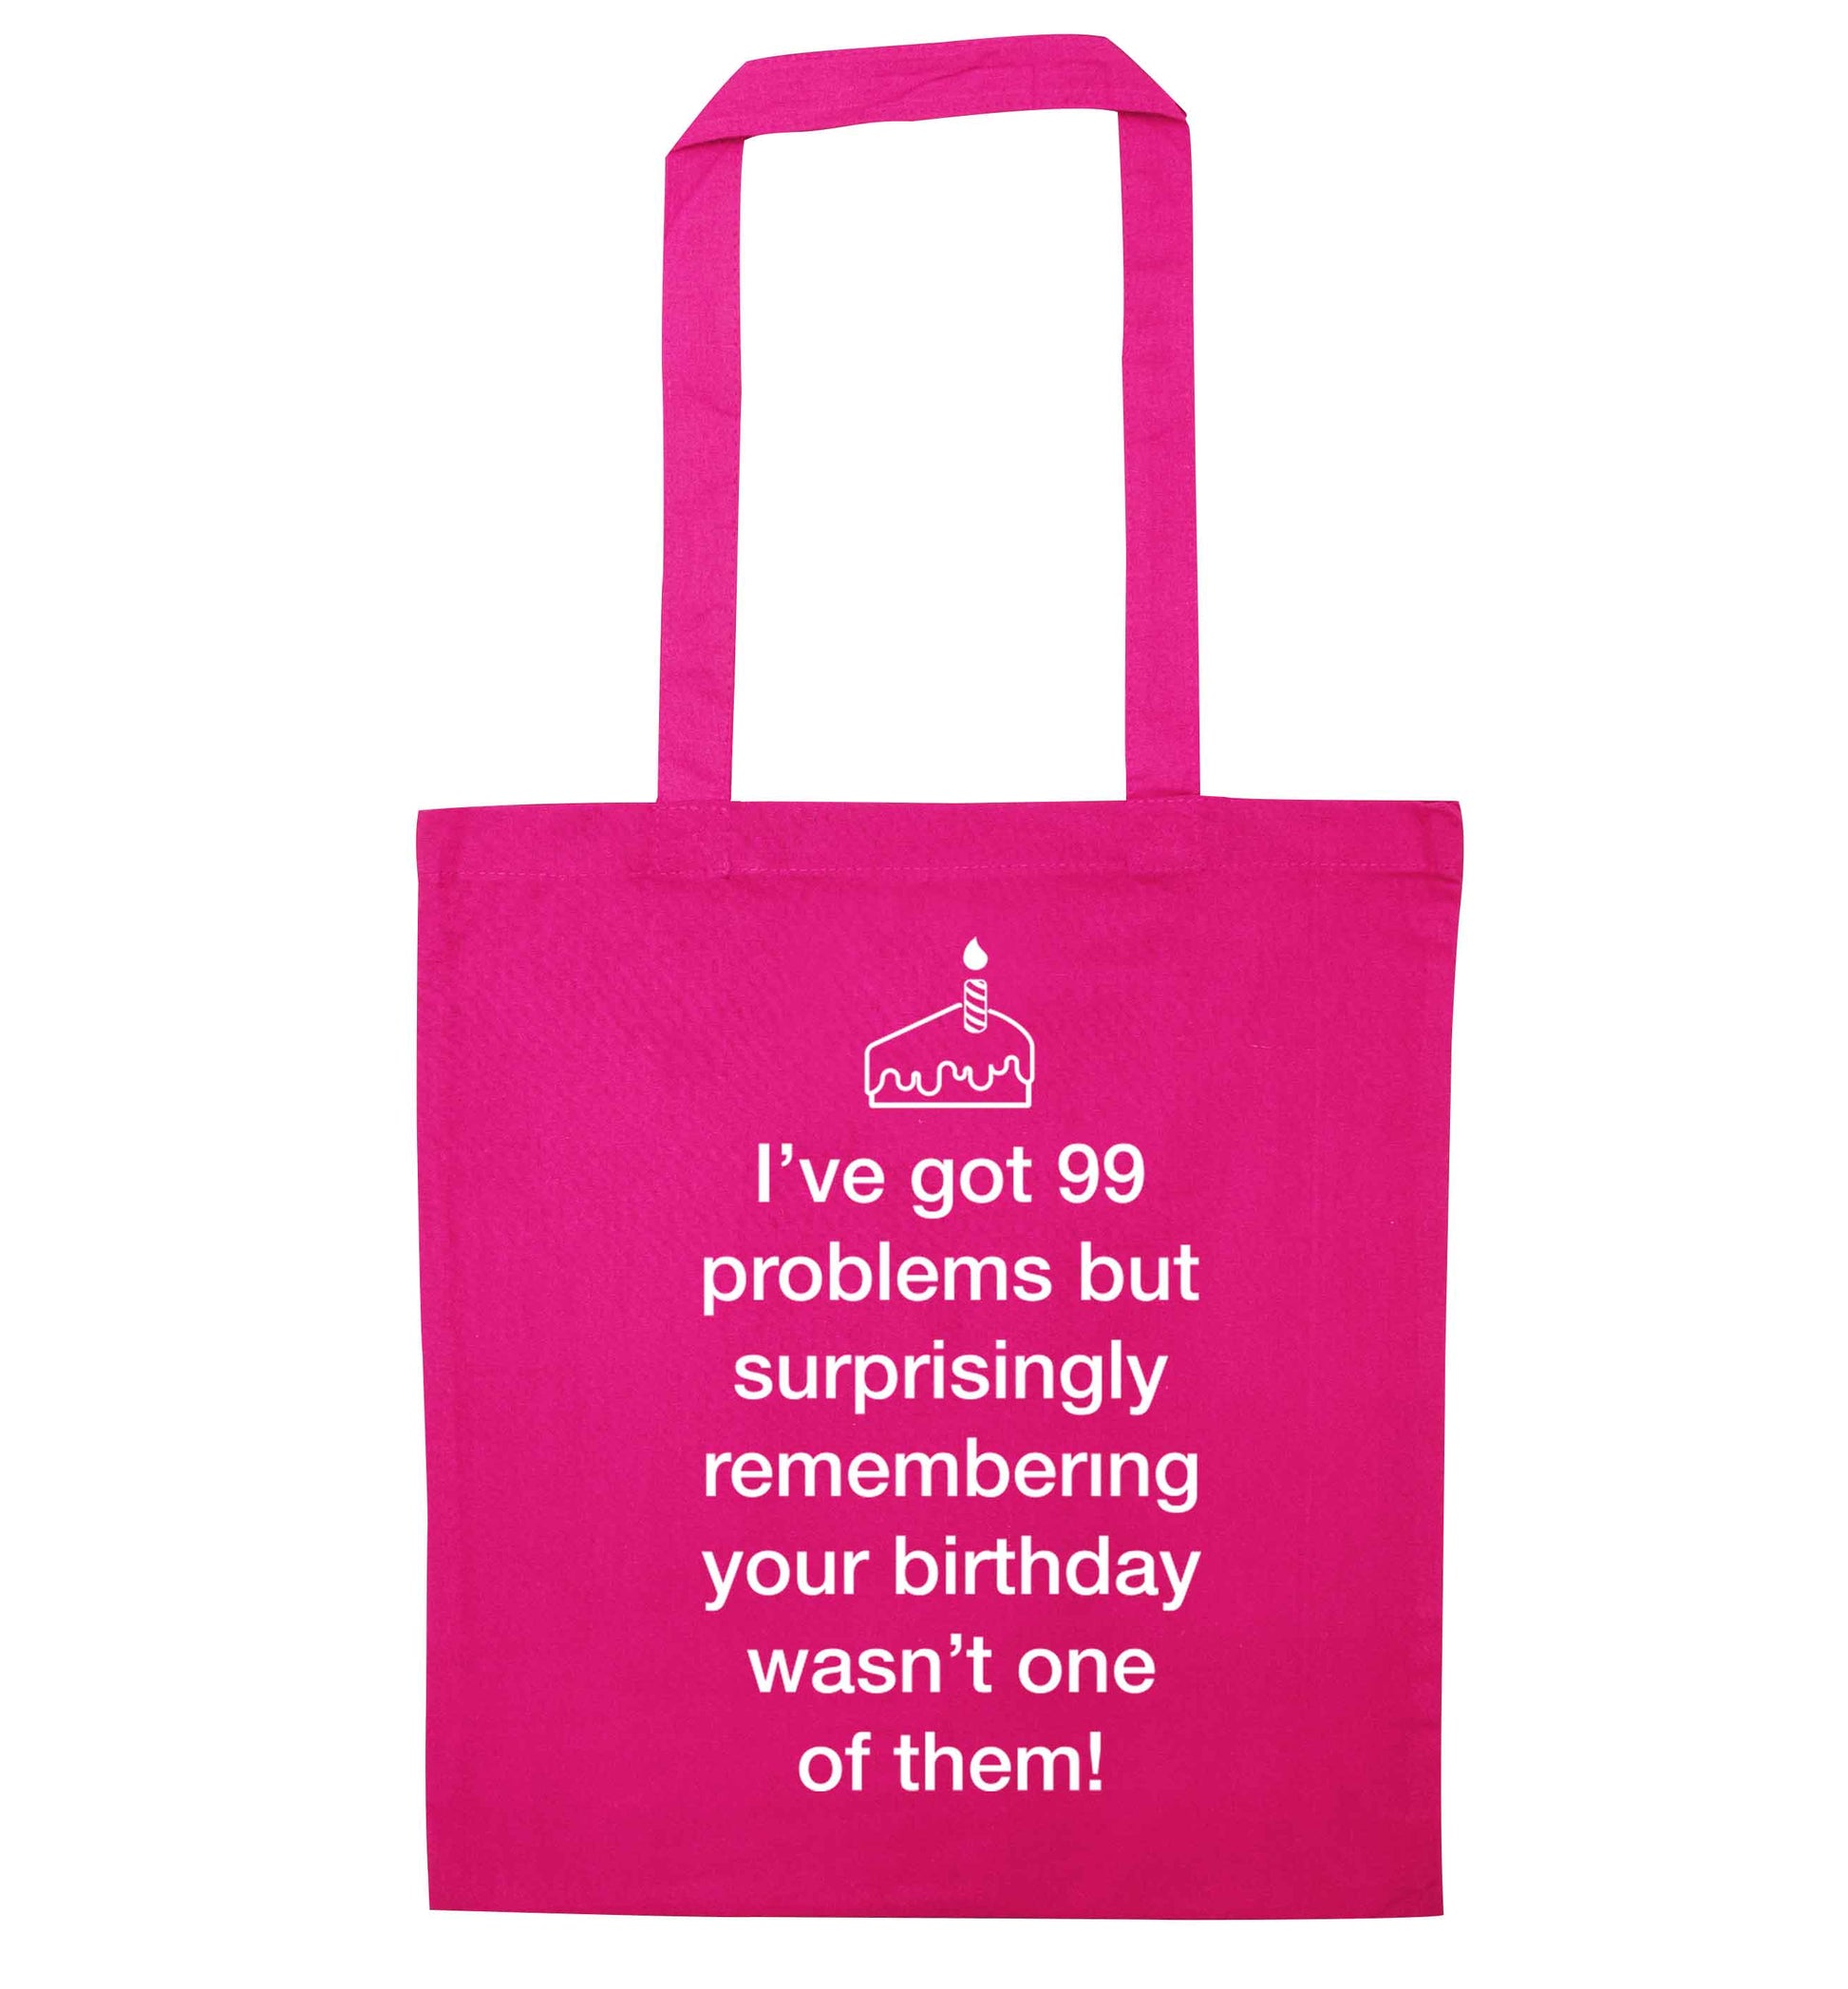 I've got 99 problems but surprisingly remembering your birthday wasn't one of them! pink tote bag